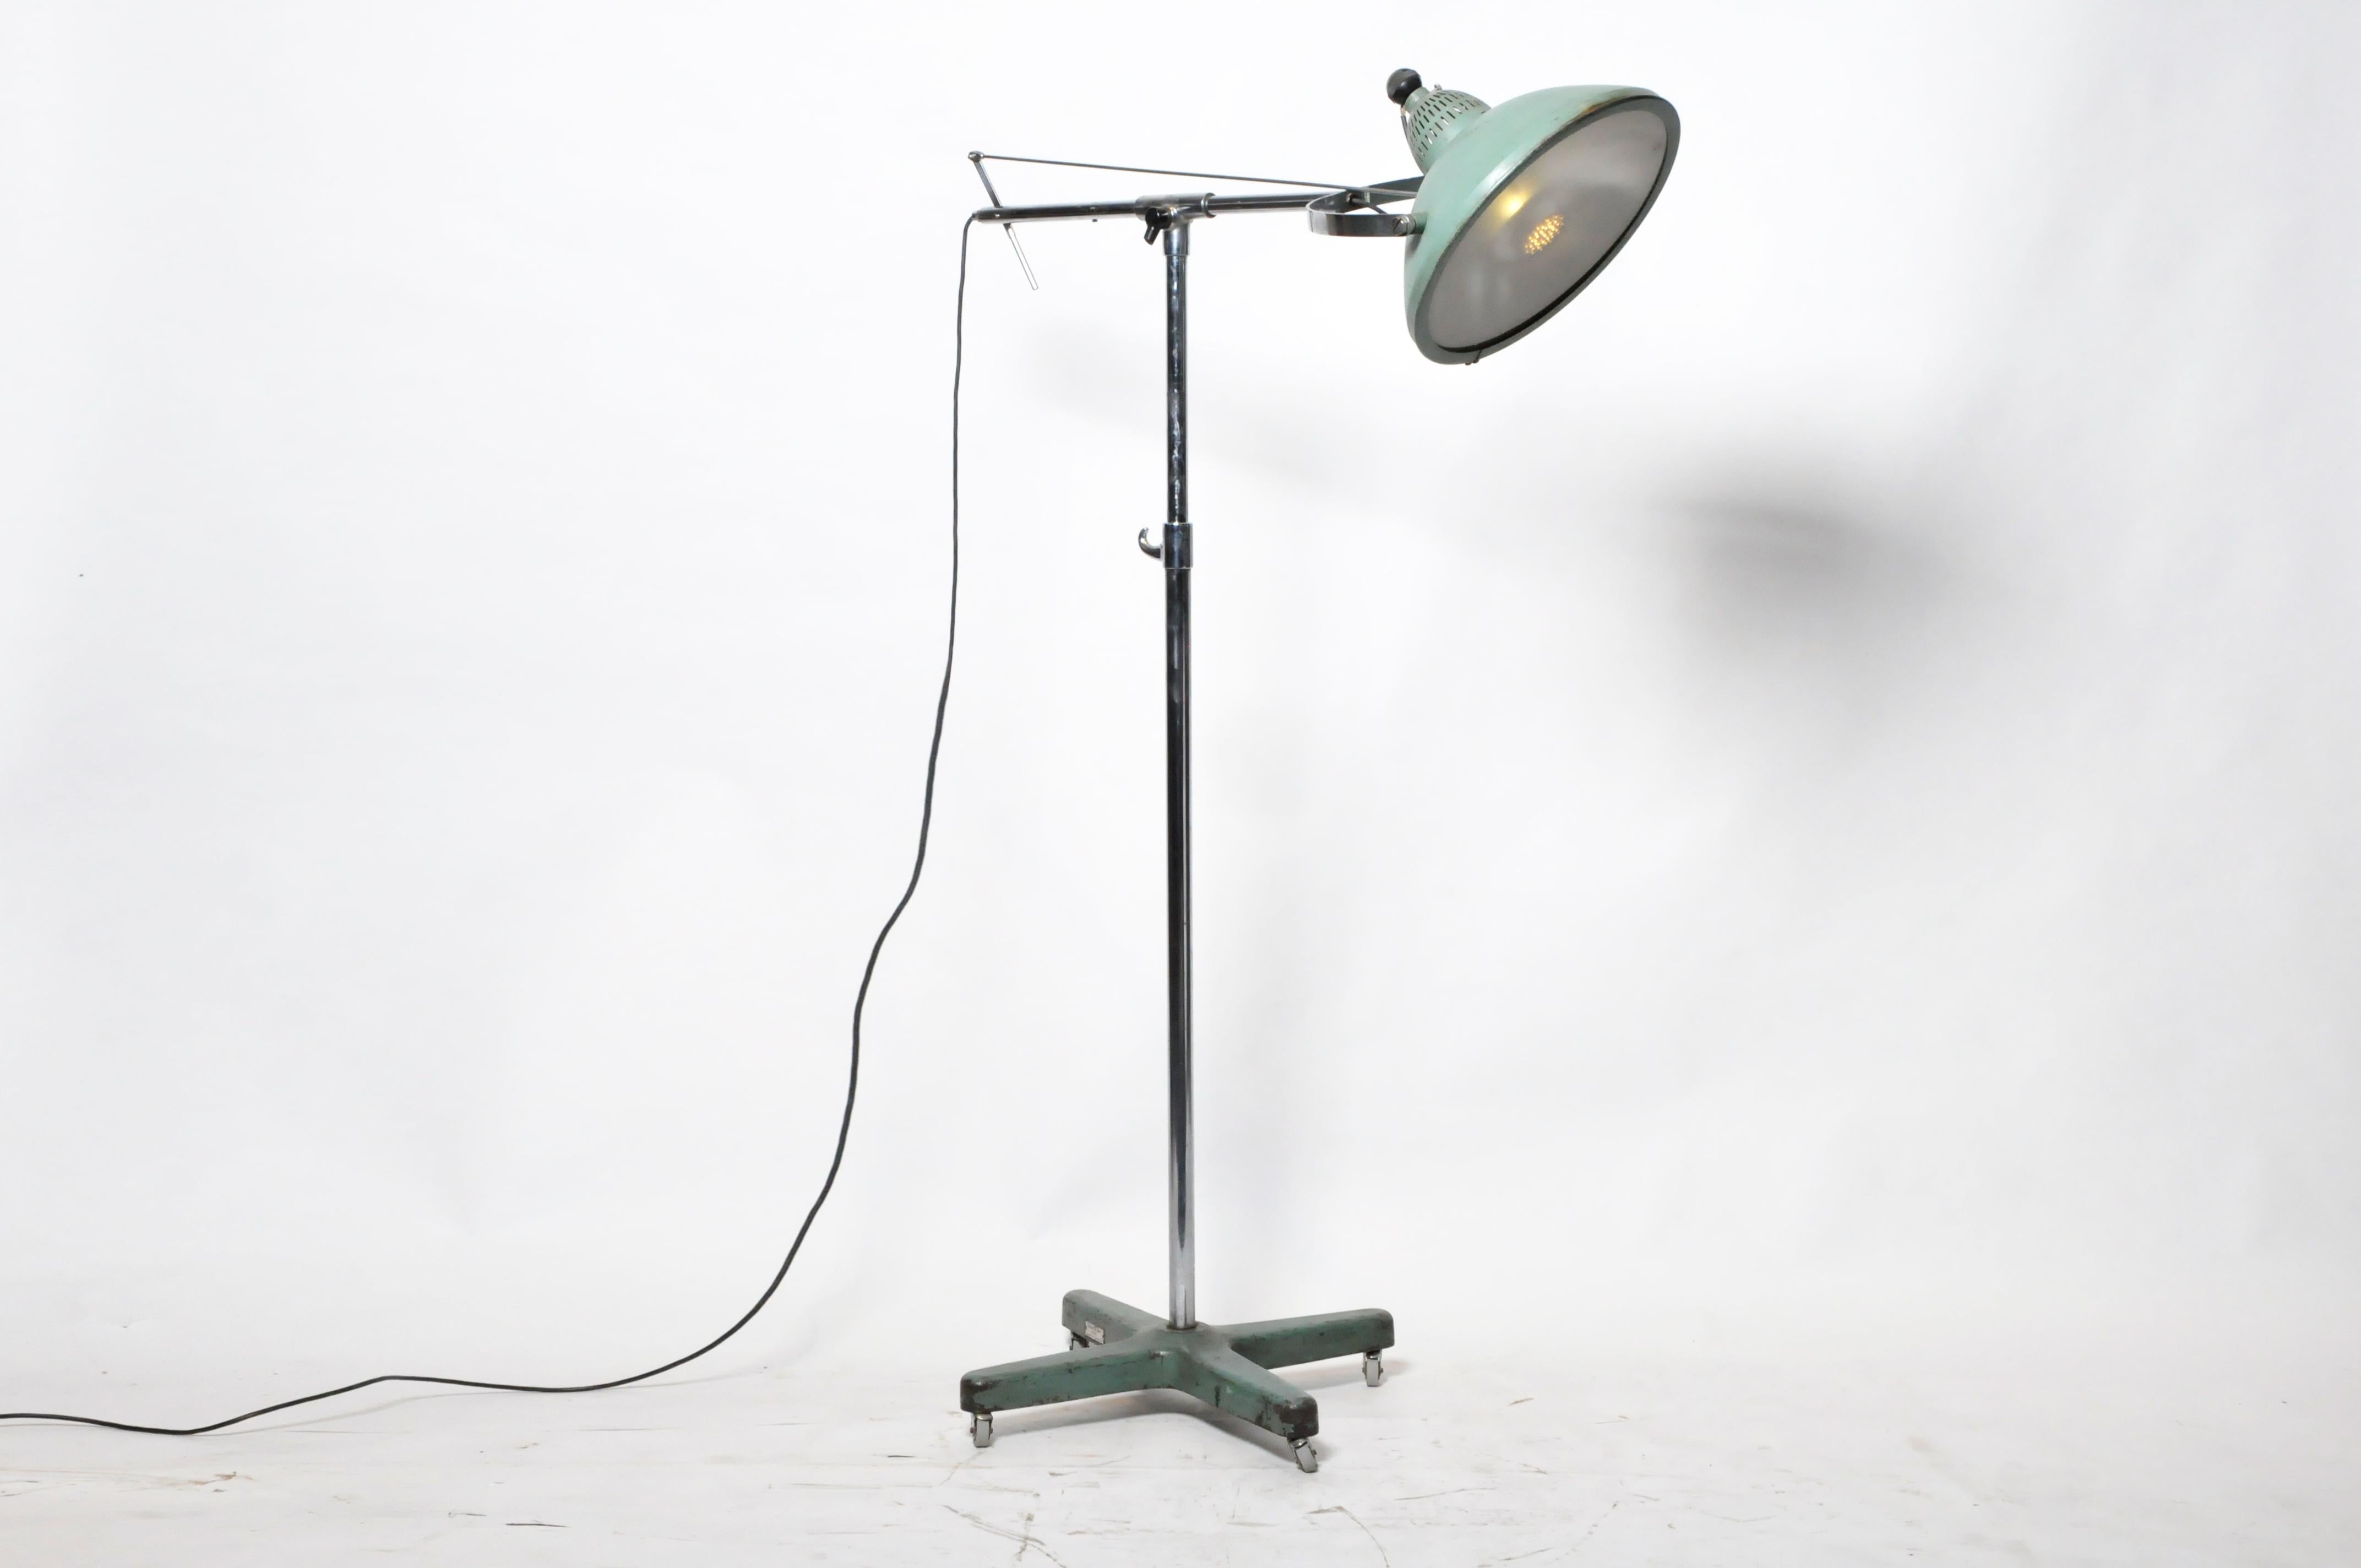 This exceptionally heavy and sturdy lamp was considered advanced technology in the 1940s. The lens is particularly interesting as it both concentrates and diffuses the light emitted through a pattern of alternating clear oculi set against a frosted